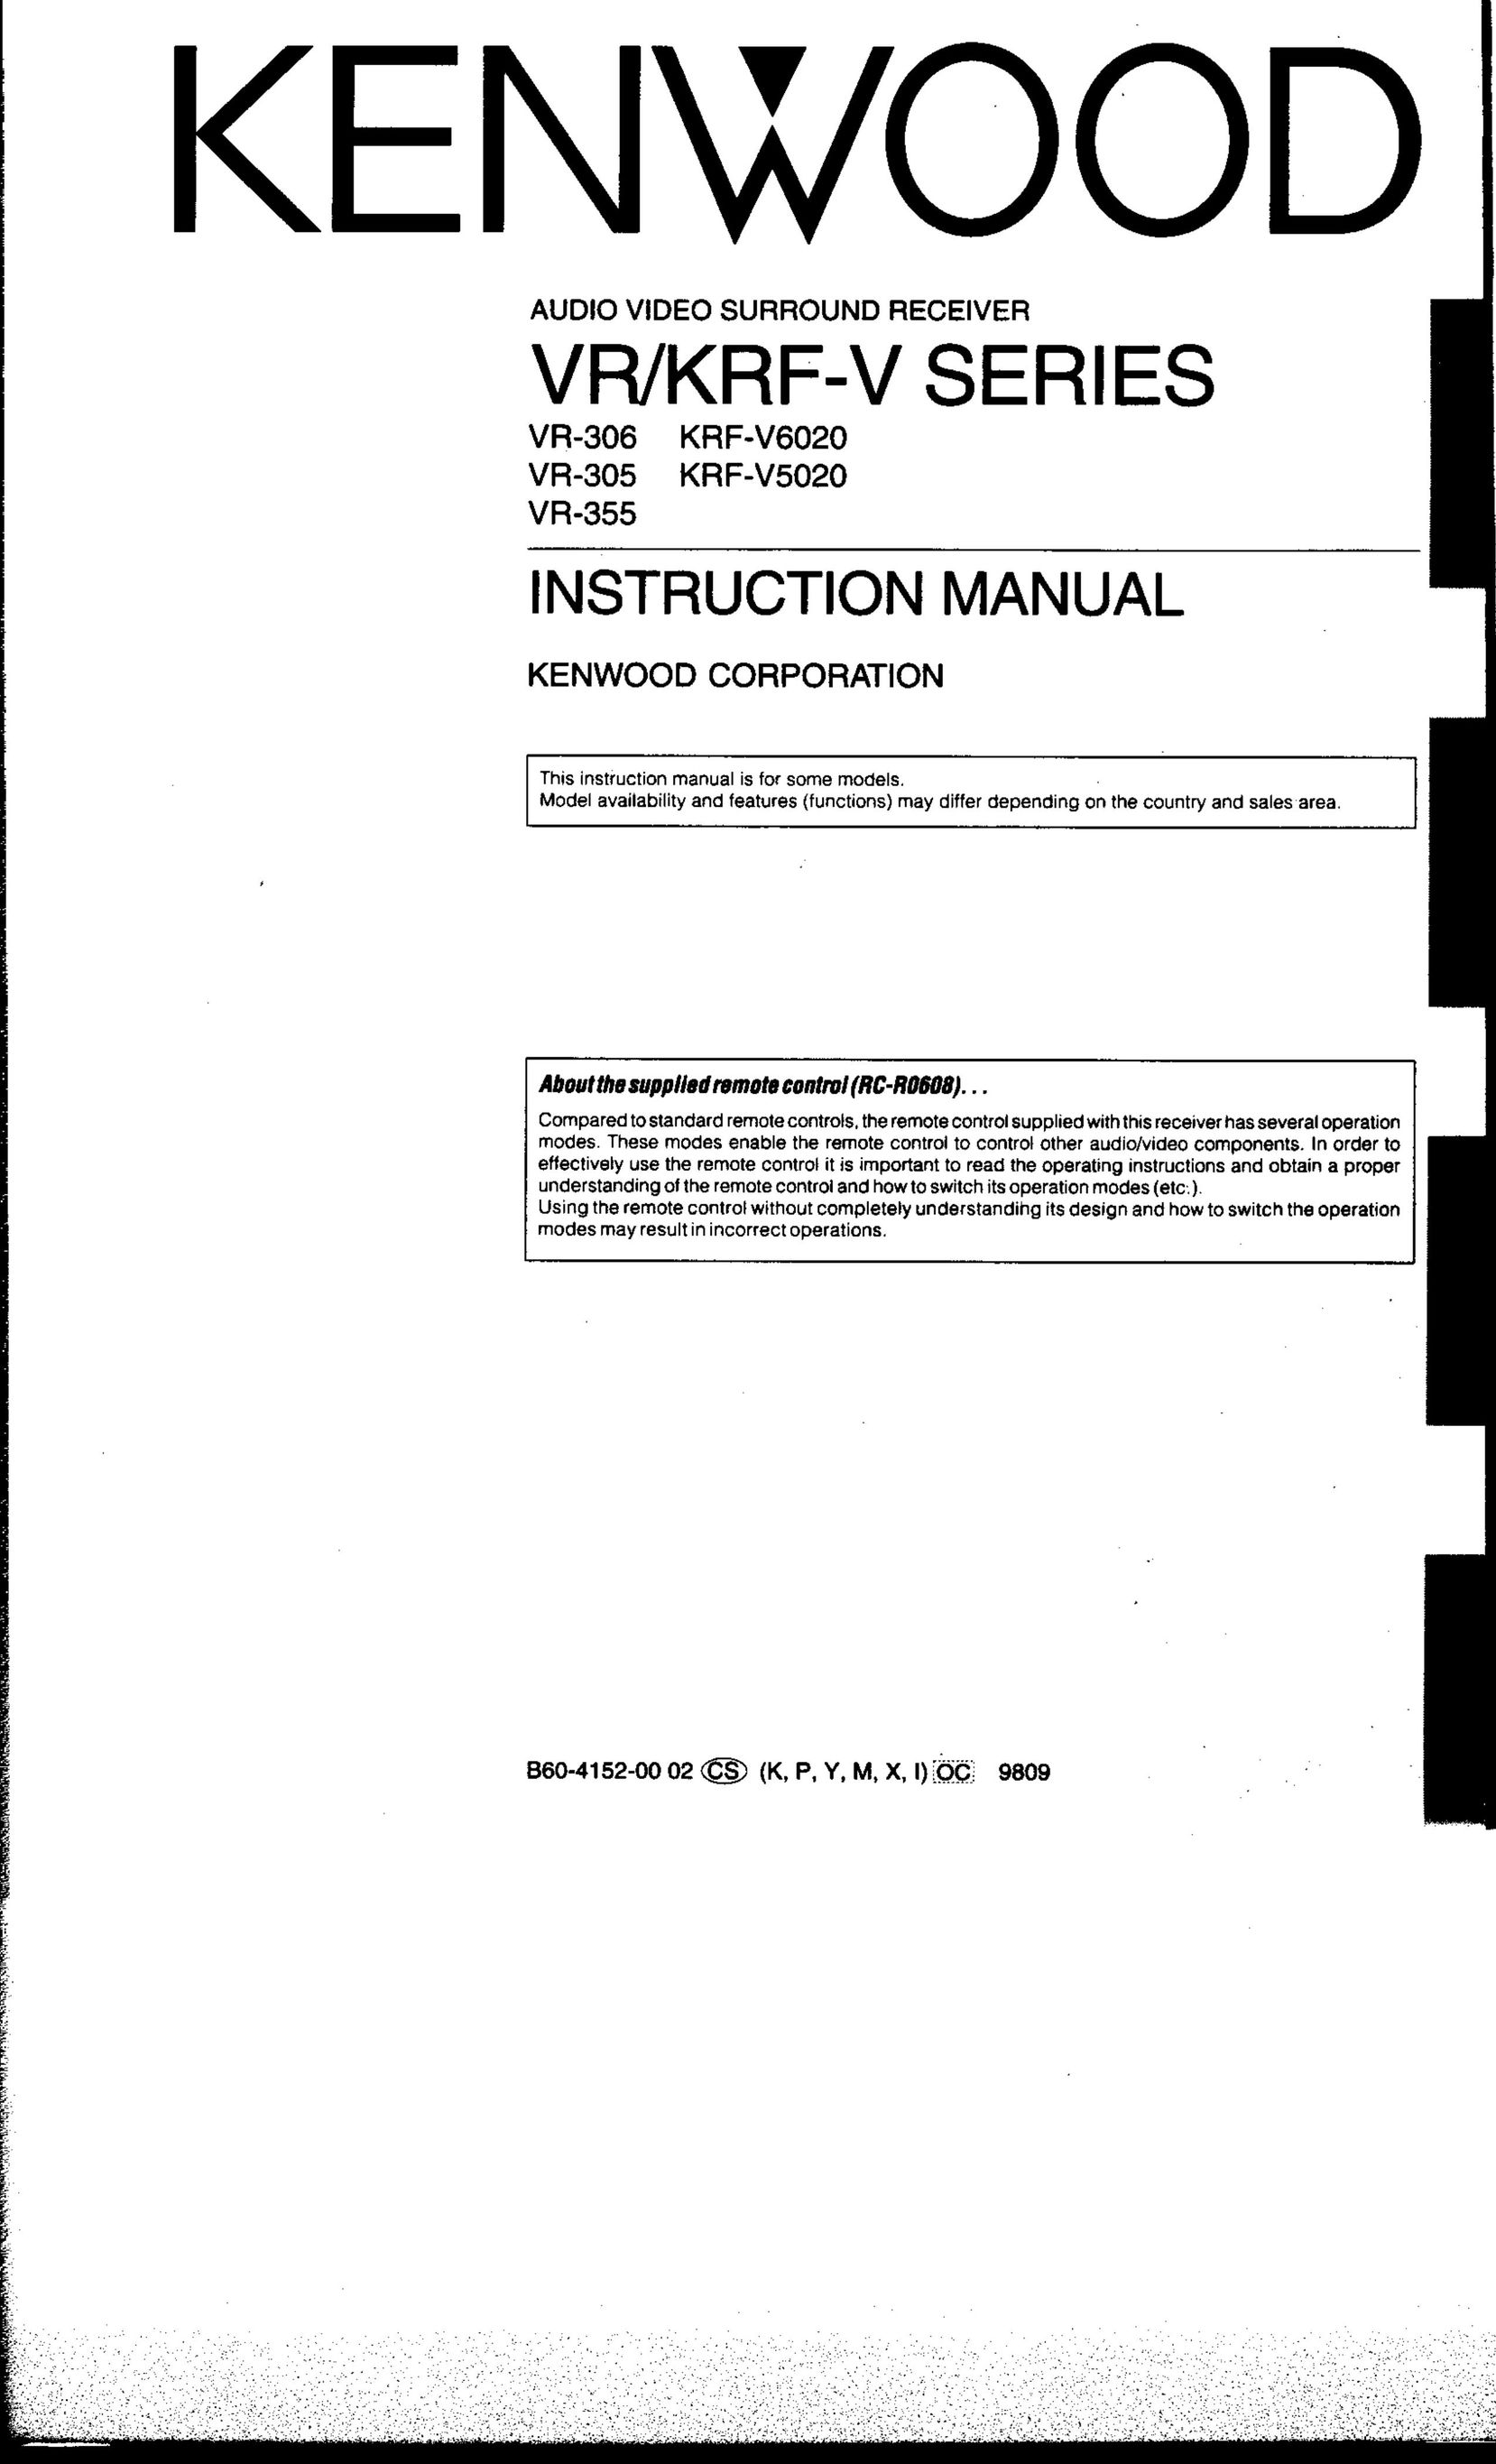 Kenwood VR-355 Home Theater System User Manual